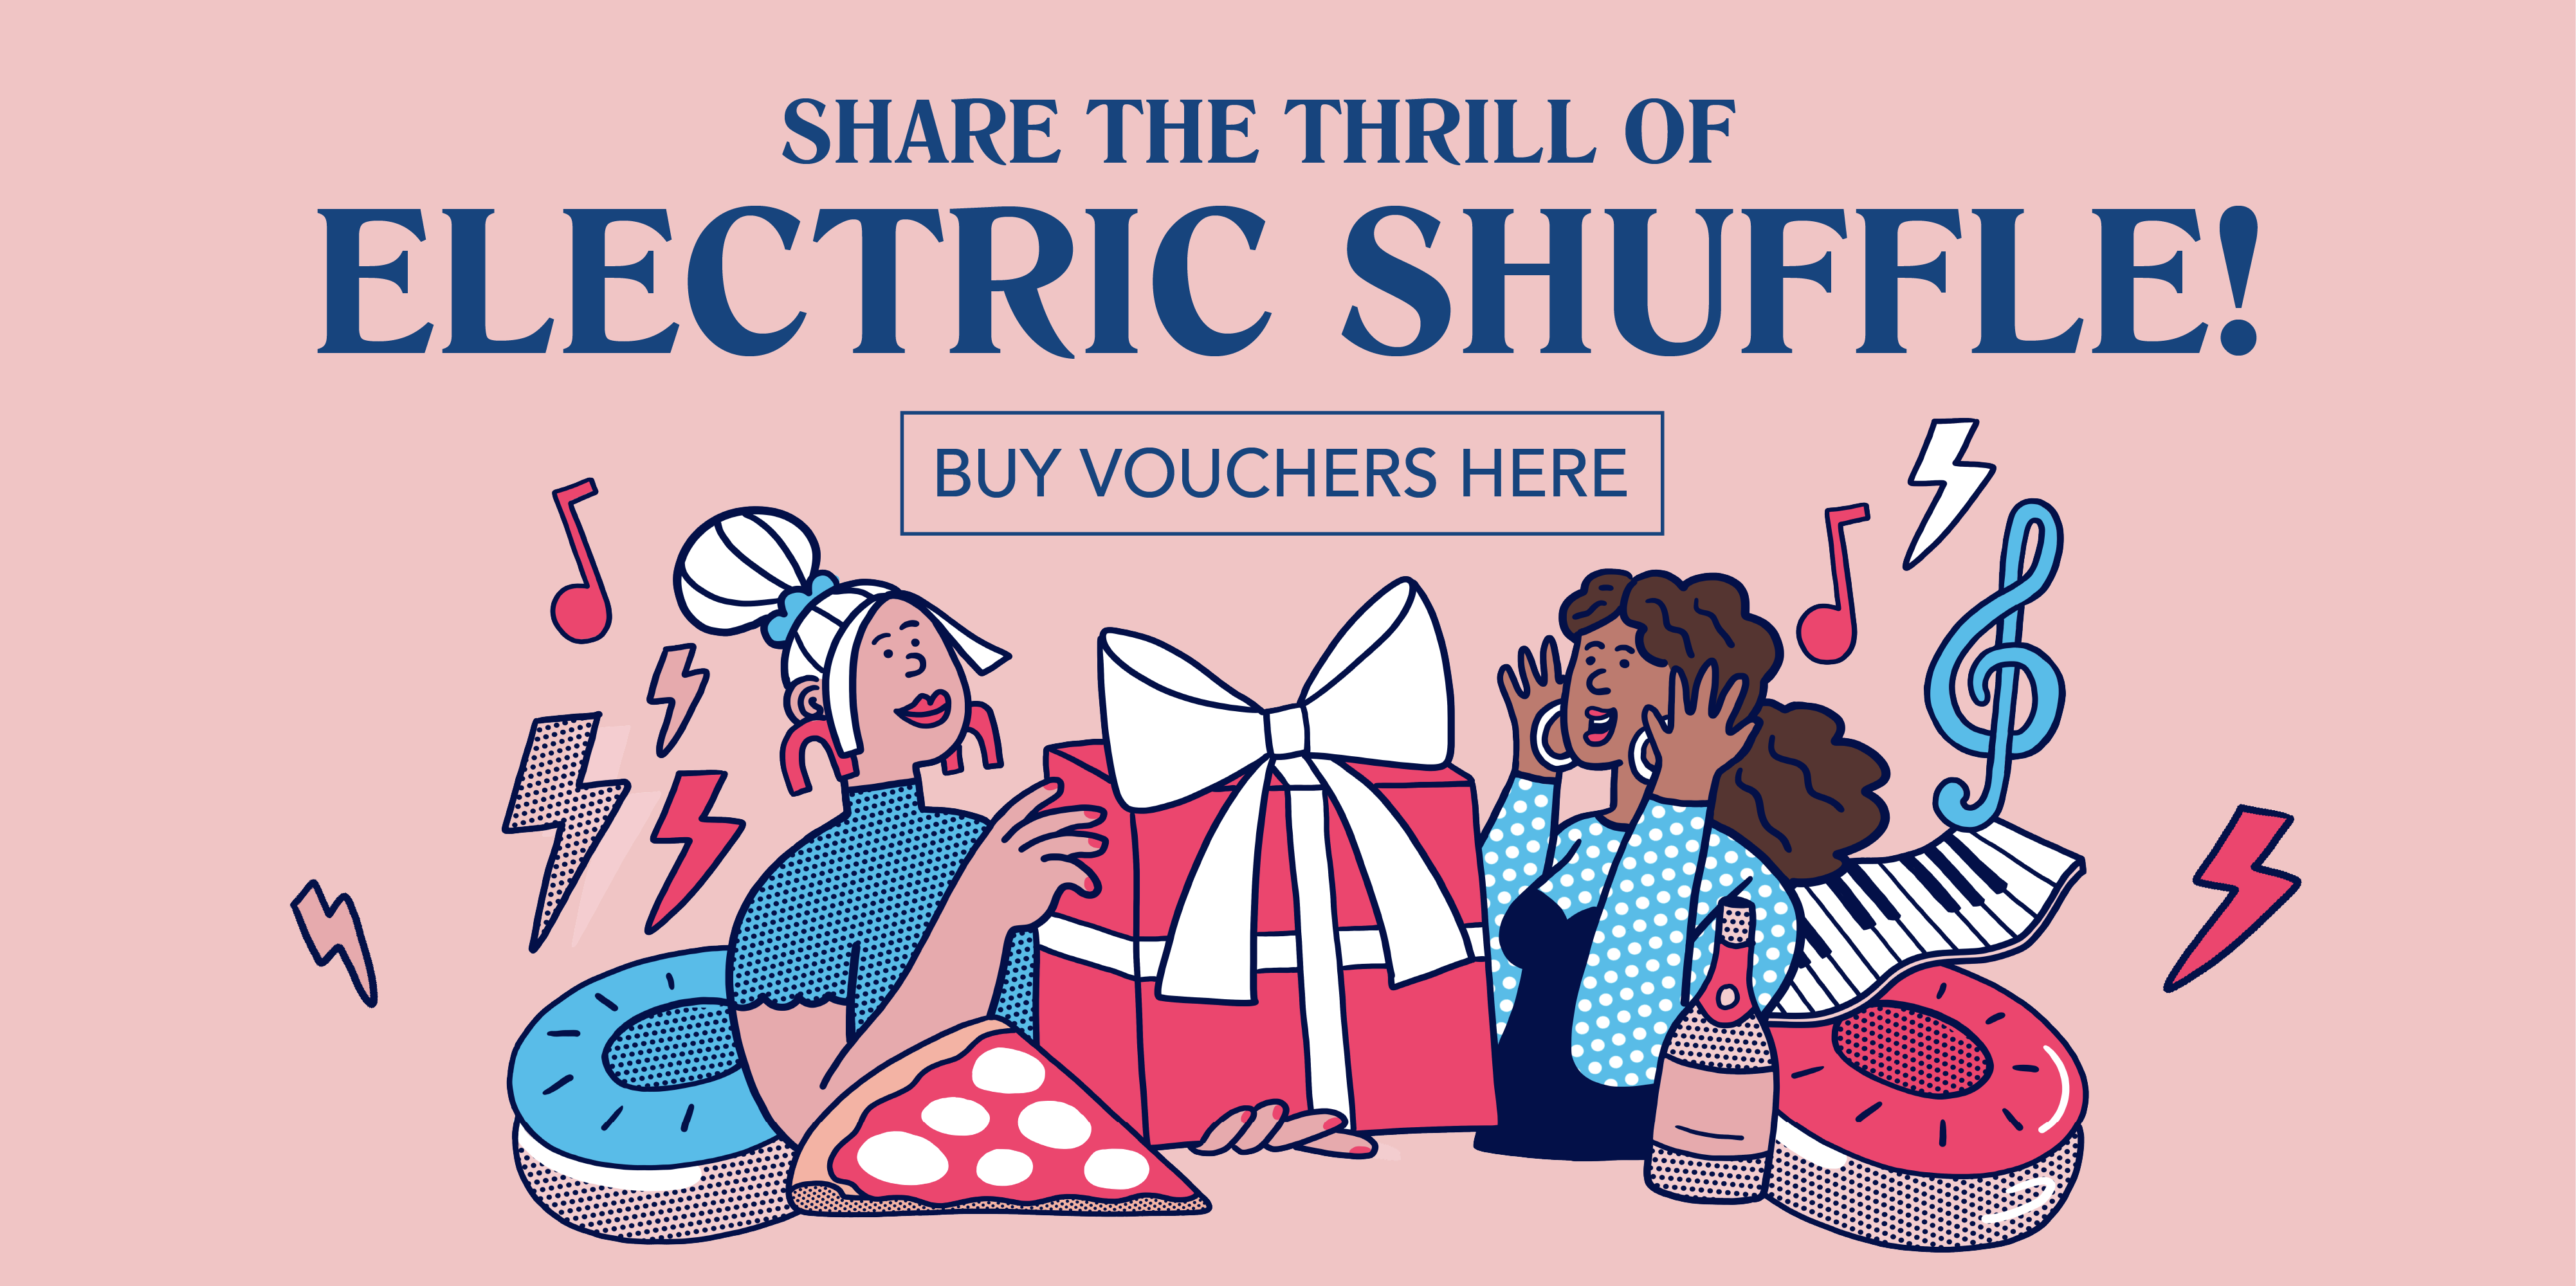 A banner for gift vouchers with the text "Share the thrill of Electric Shuffle, Buy vouchers here", with illustrations of two women and a present